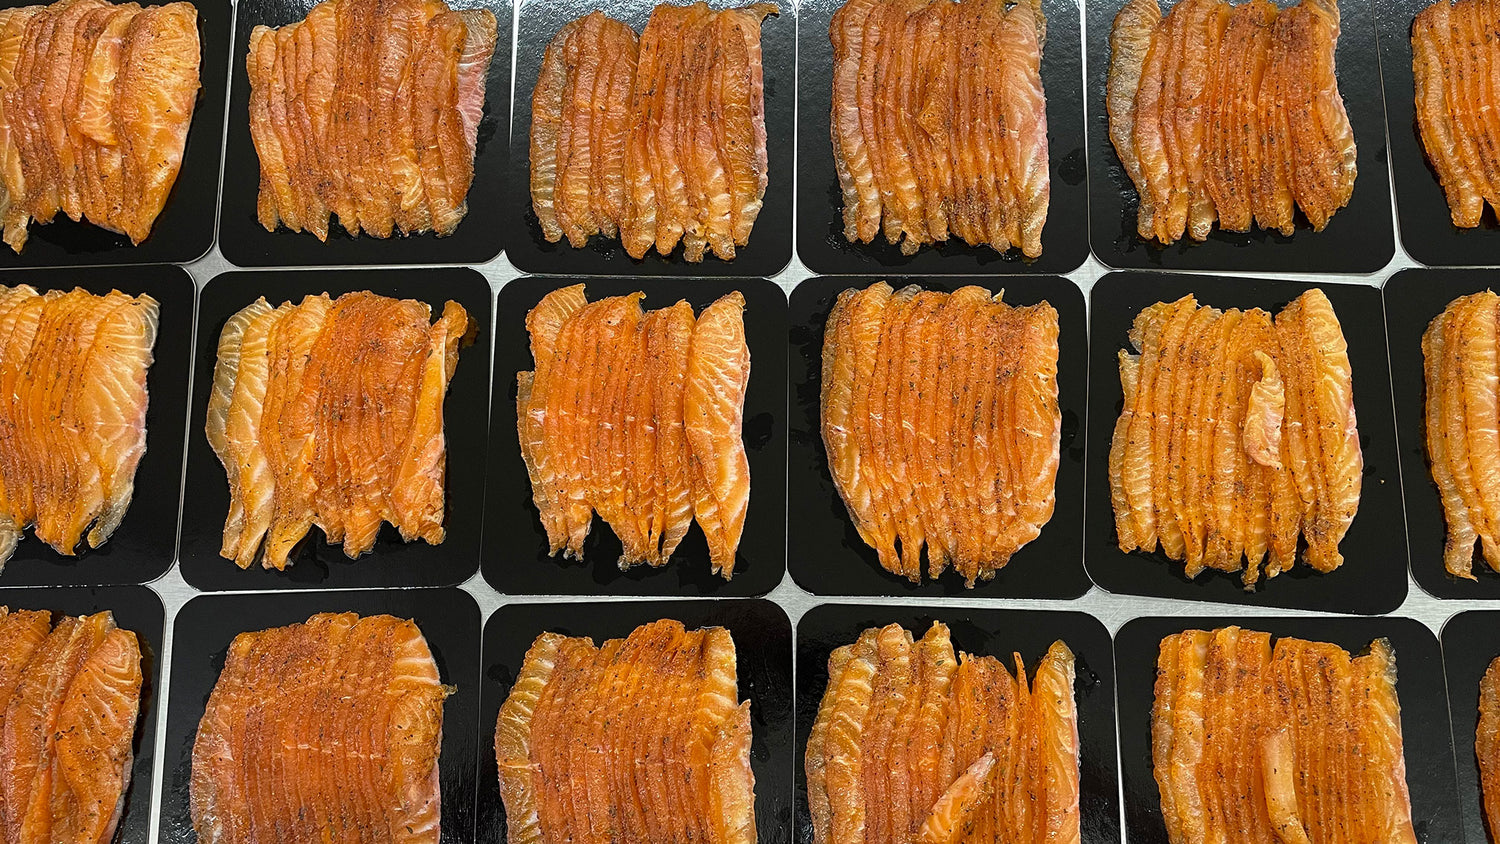 Zaidies smoked salmon lineup waiting to be packaged.